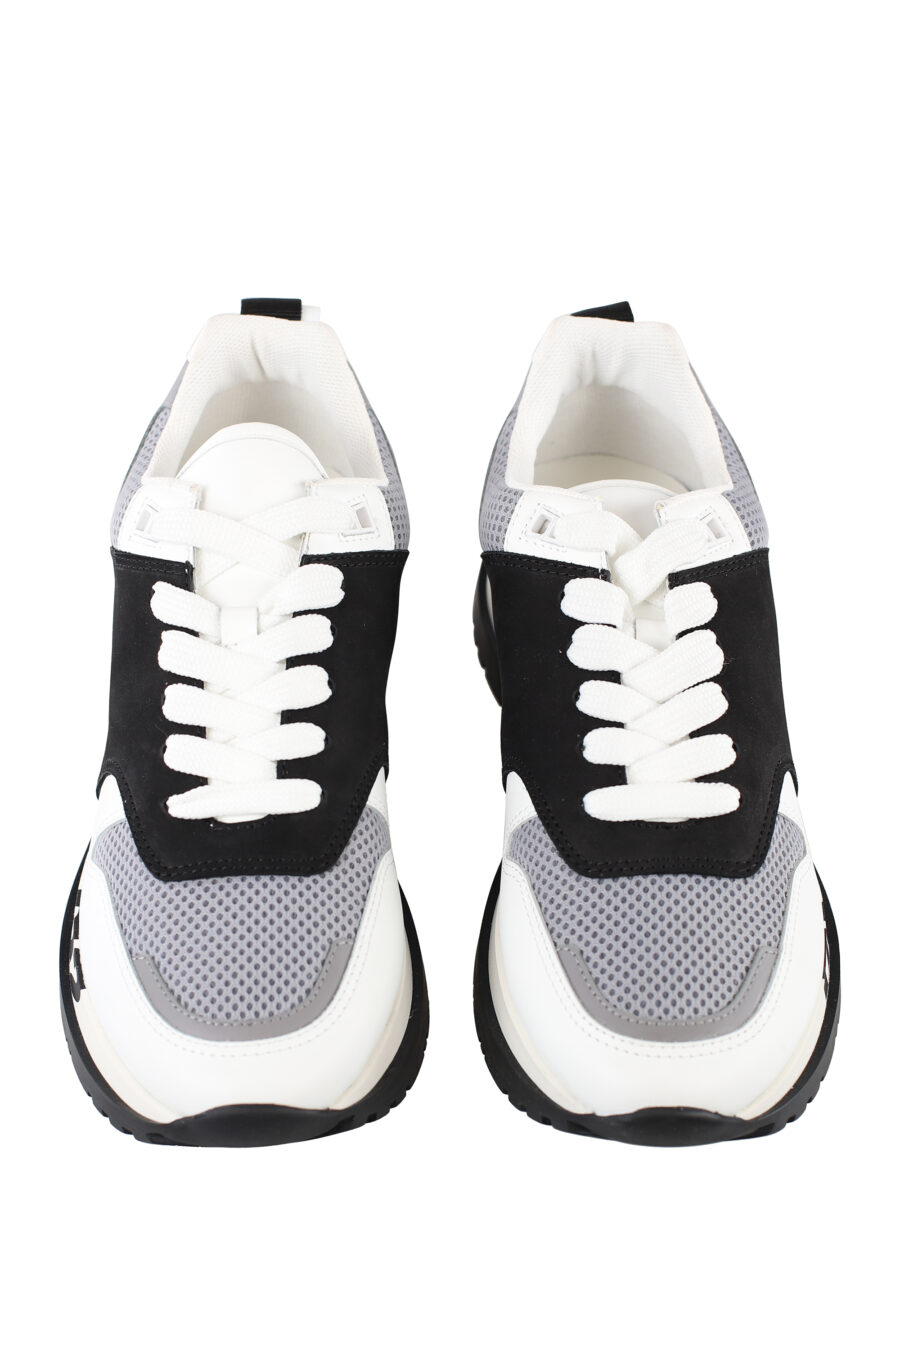 White trainers with black and grey detail with logo on sole - IMG 6719